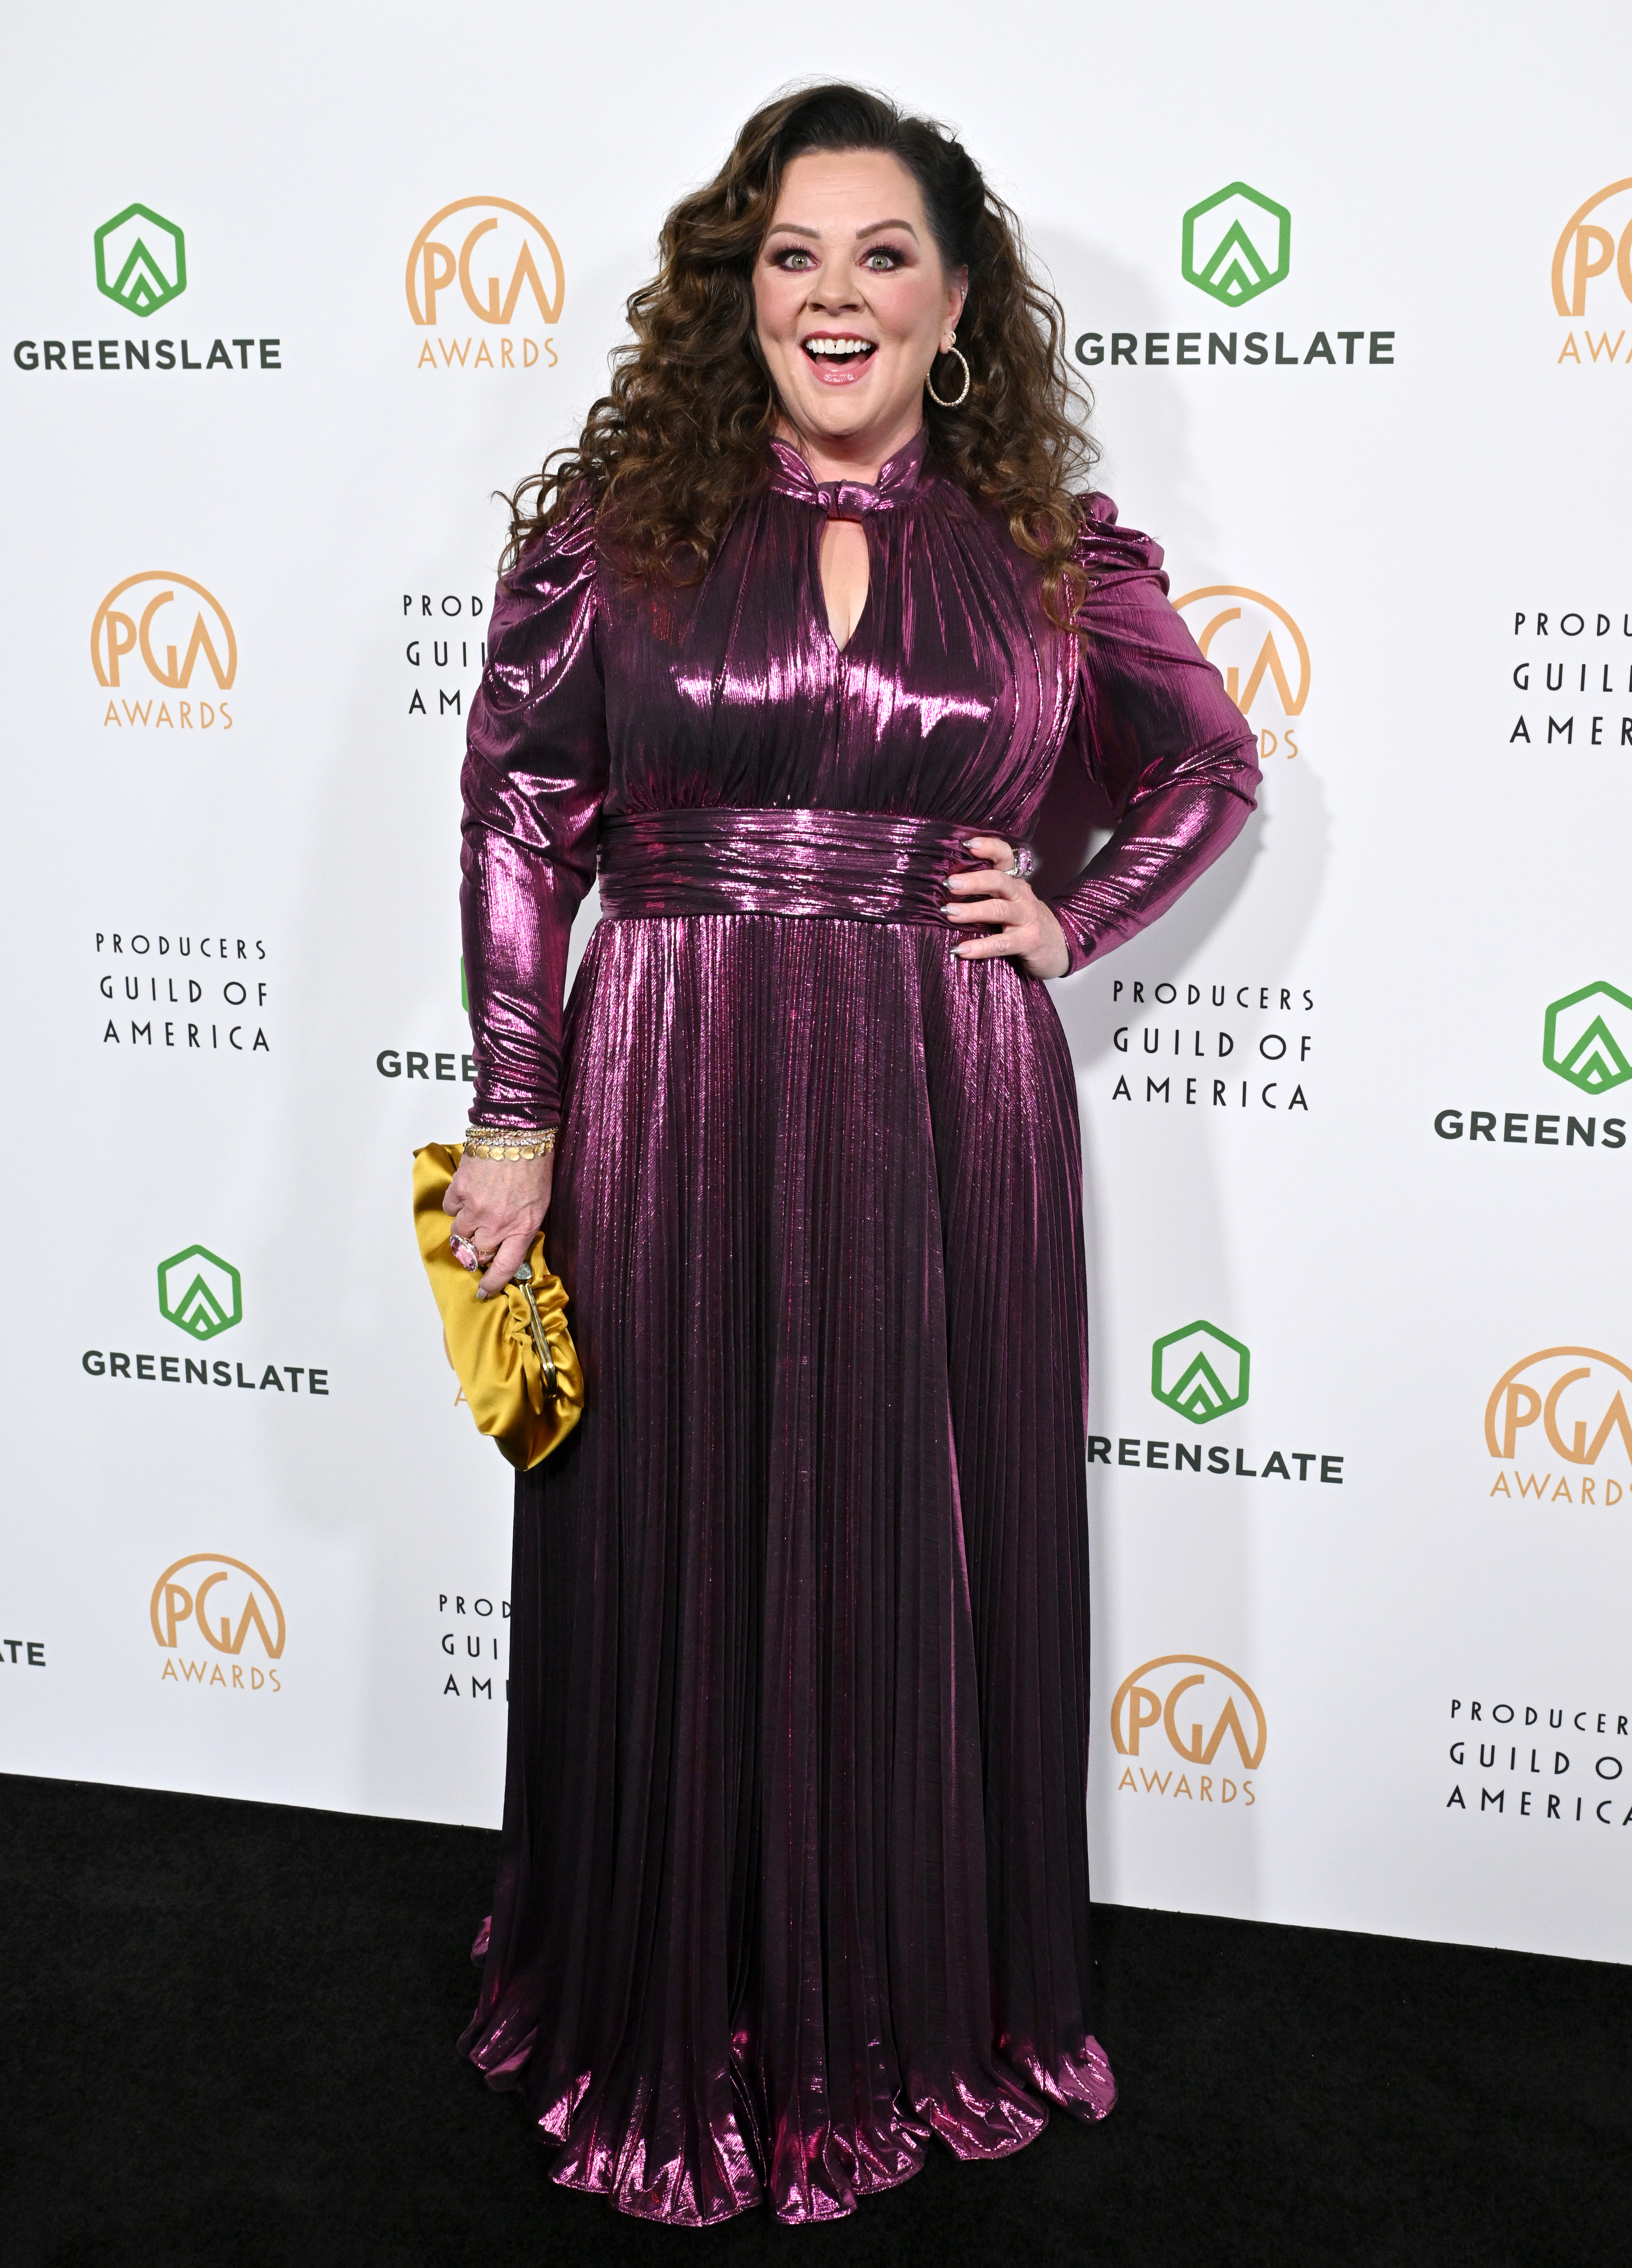 Melissa in a pleated metallic dress posing at the Producers Guild of America event